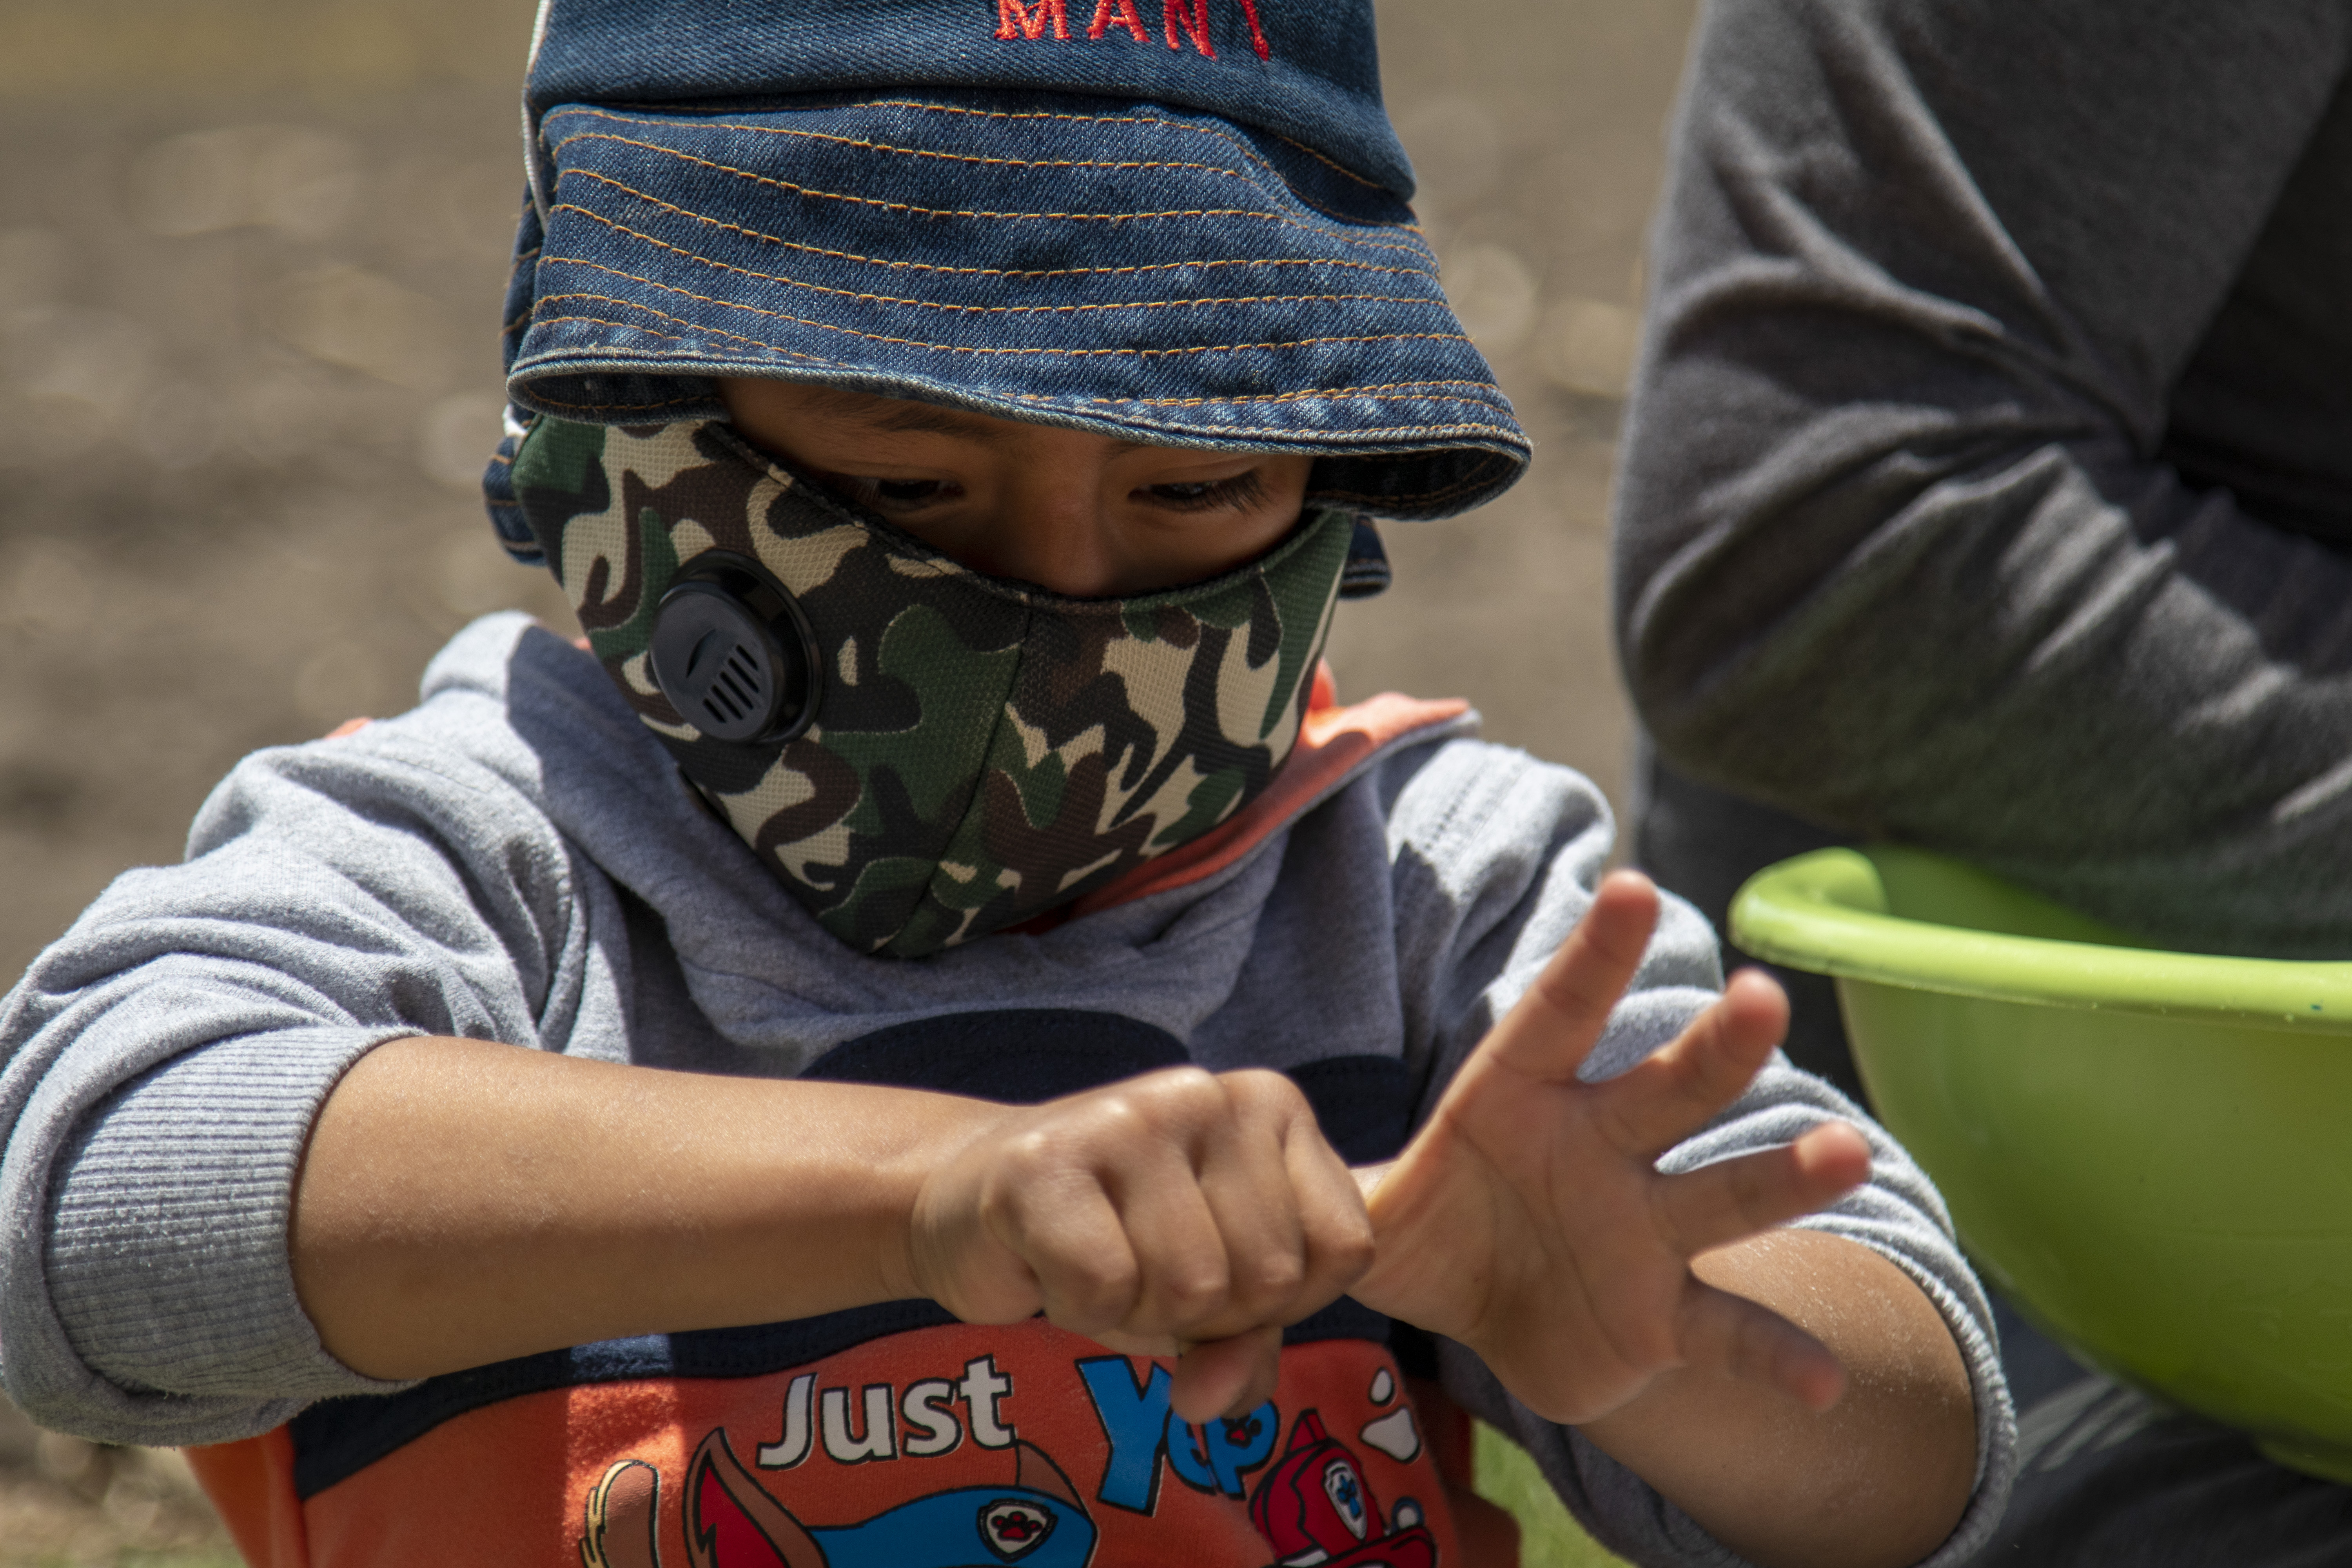 Victor, a 5-year-old from Ecuador demonstrates what he learned from World Vision, how to properly wash his hands to protect himself and his family from COVID-19